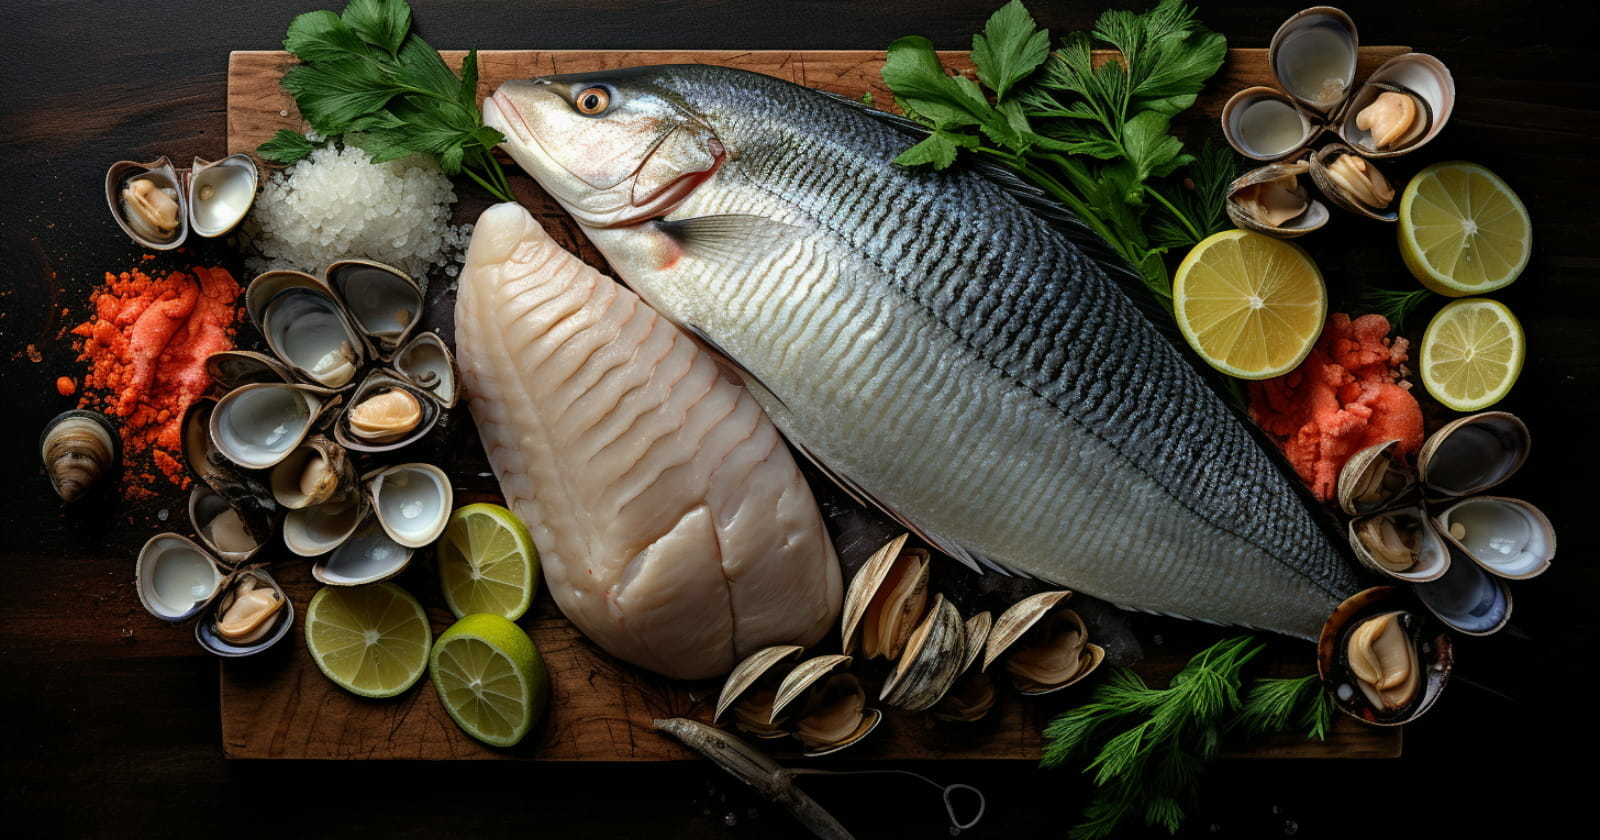 Table of foods rich in taurine like tilapia fish, seaweed, raw squid, clams, scallops